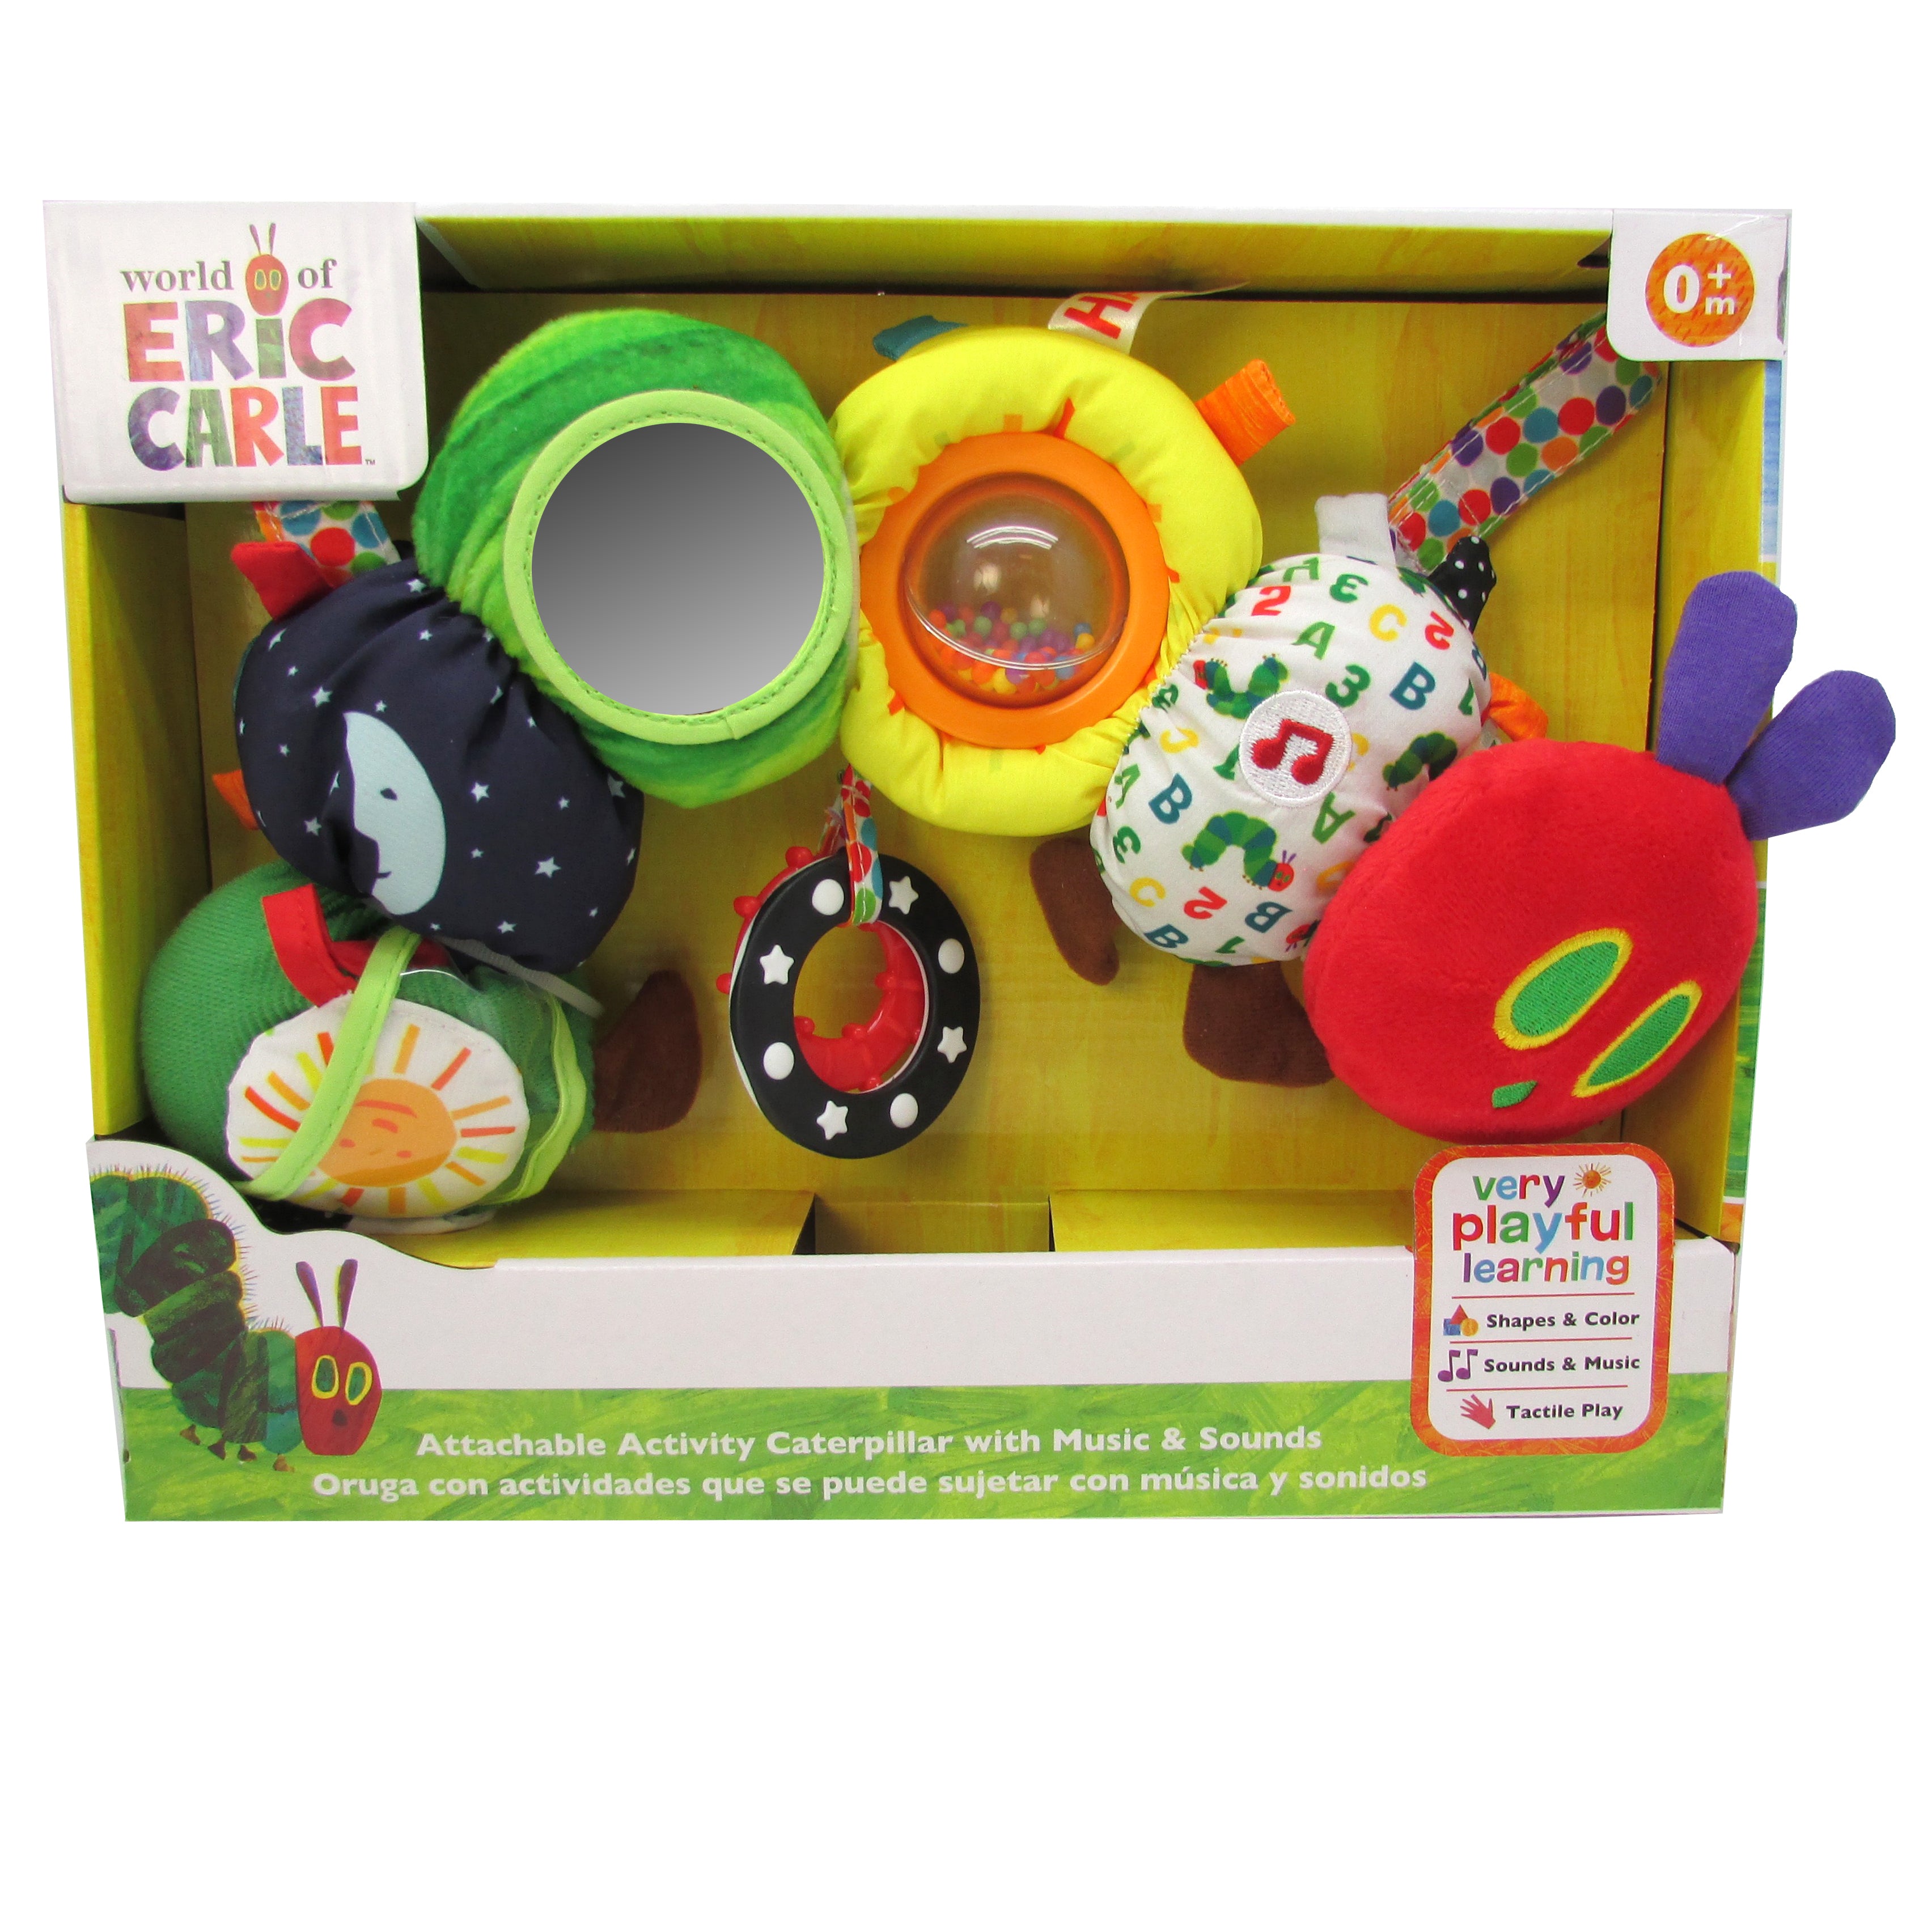 The World of Eric Carle The Very Hungry Caterpillar Attachable